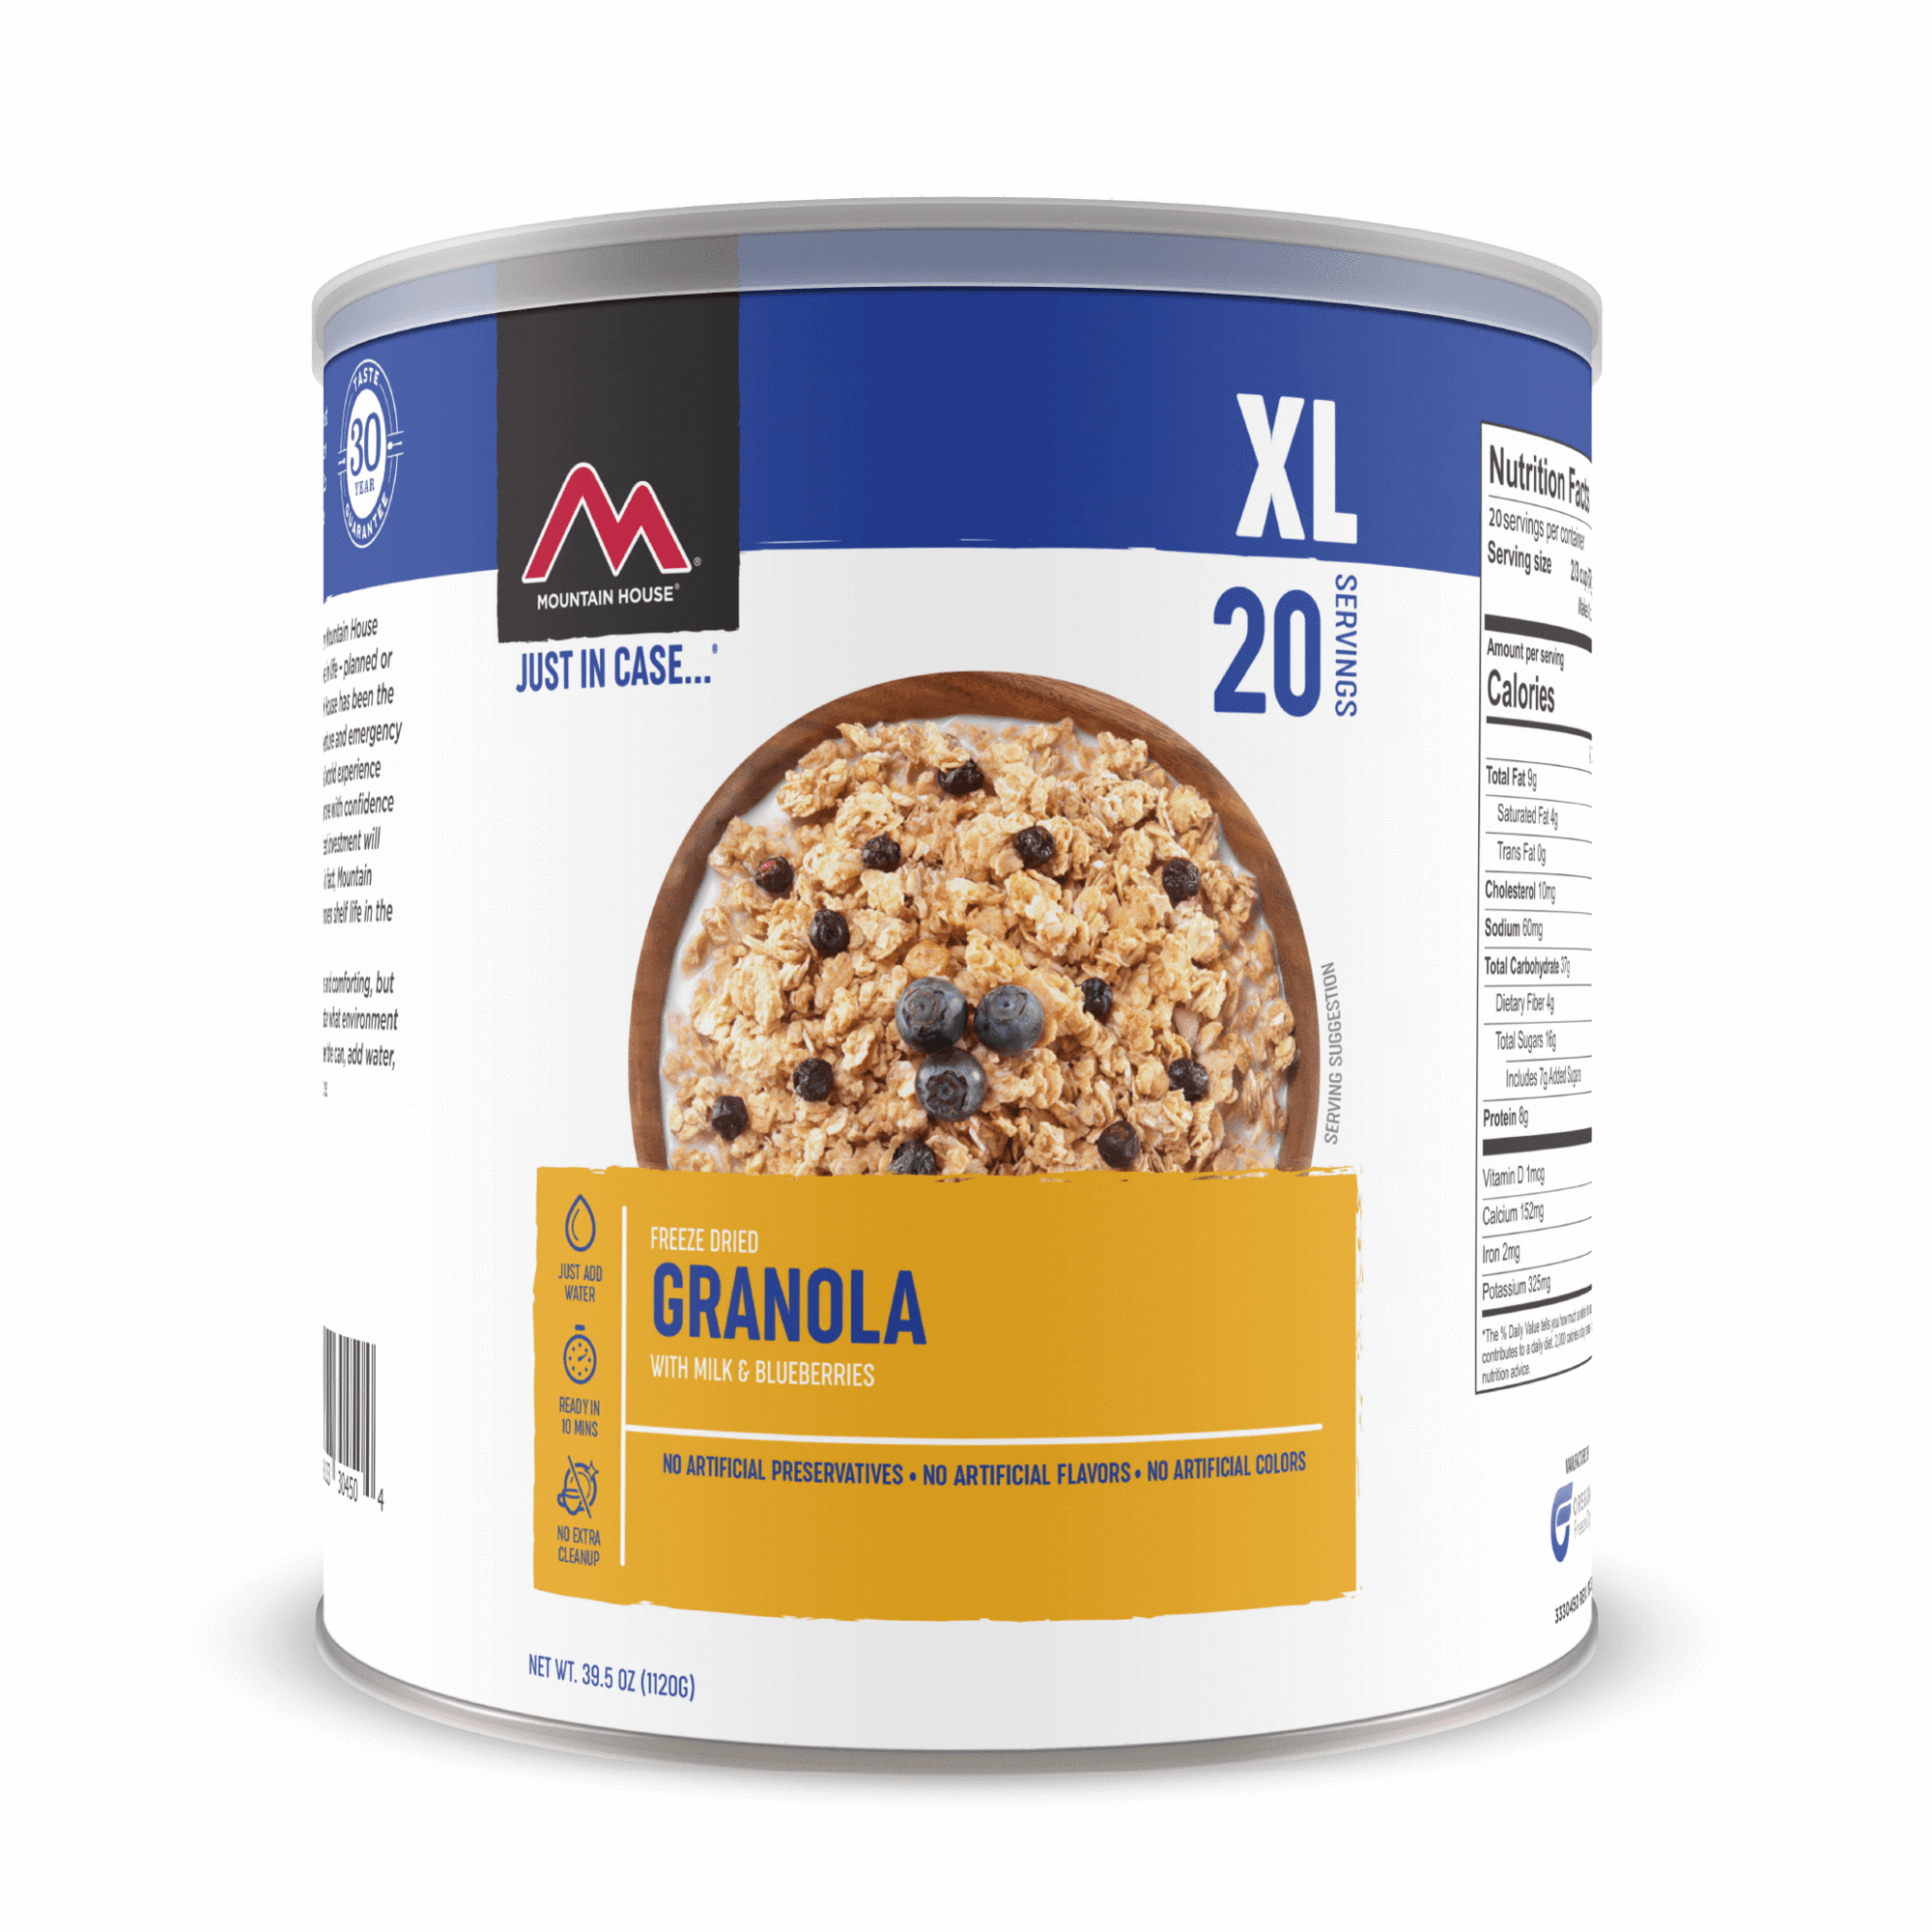 A Mountain House Granola with Blueberries and Milk #10 Can - 20 Servings - (SHIPS IN 1-2 WEEKS) on a white background.